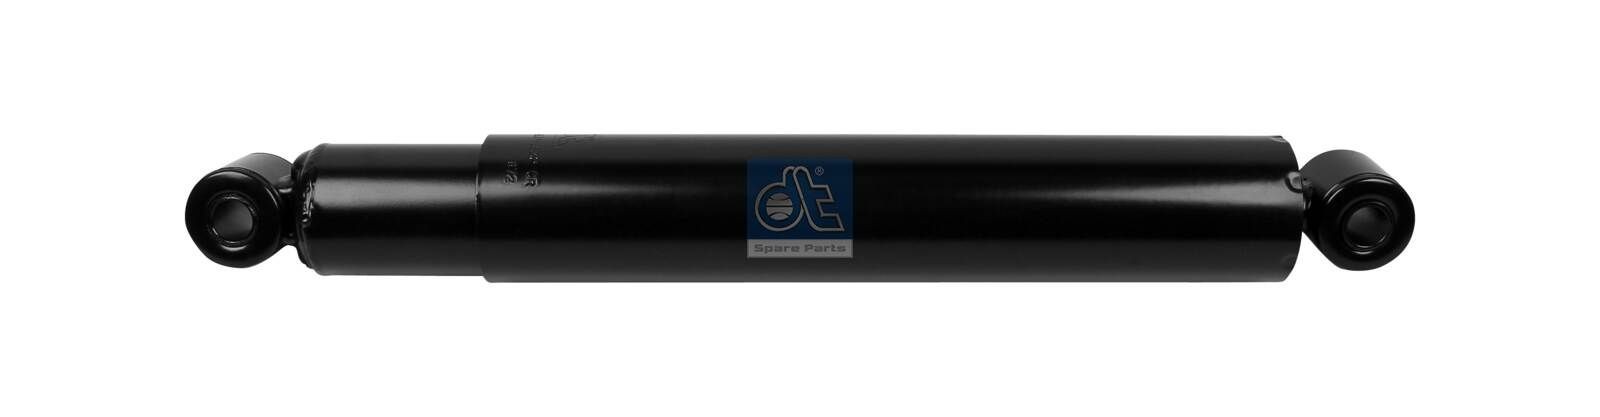 DT Spare Parts 1.25832 Shock absorber cheap in online store